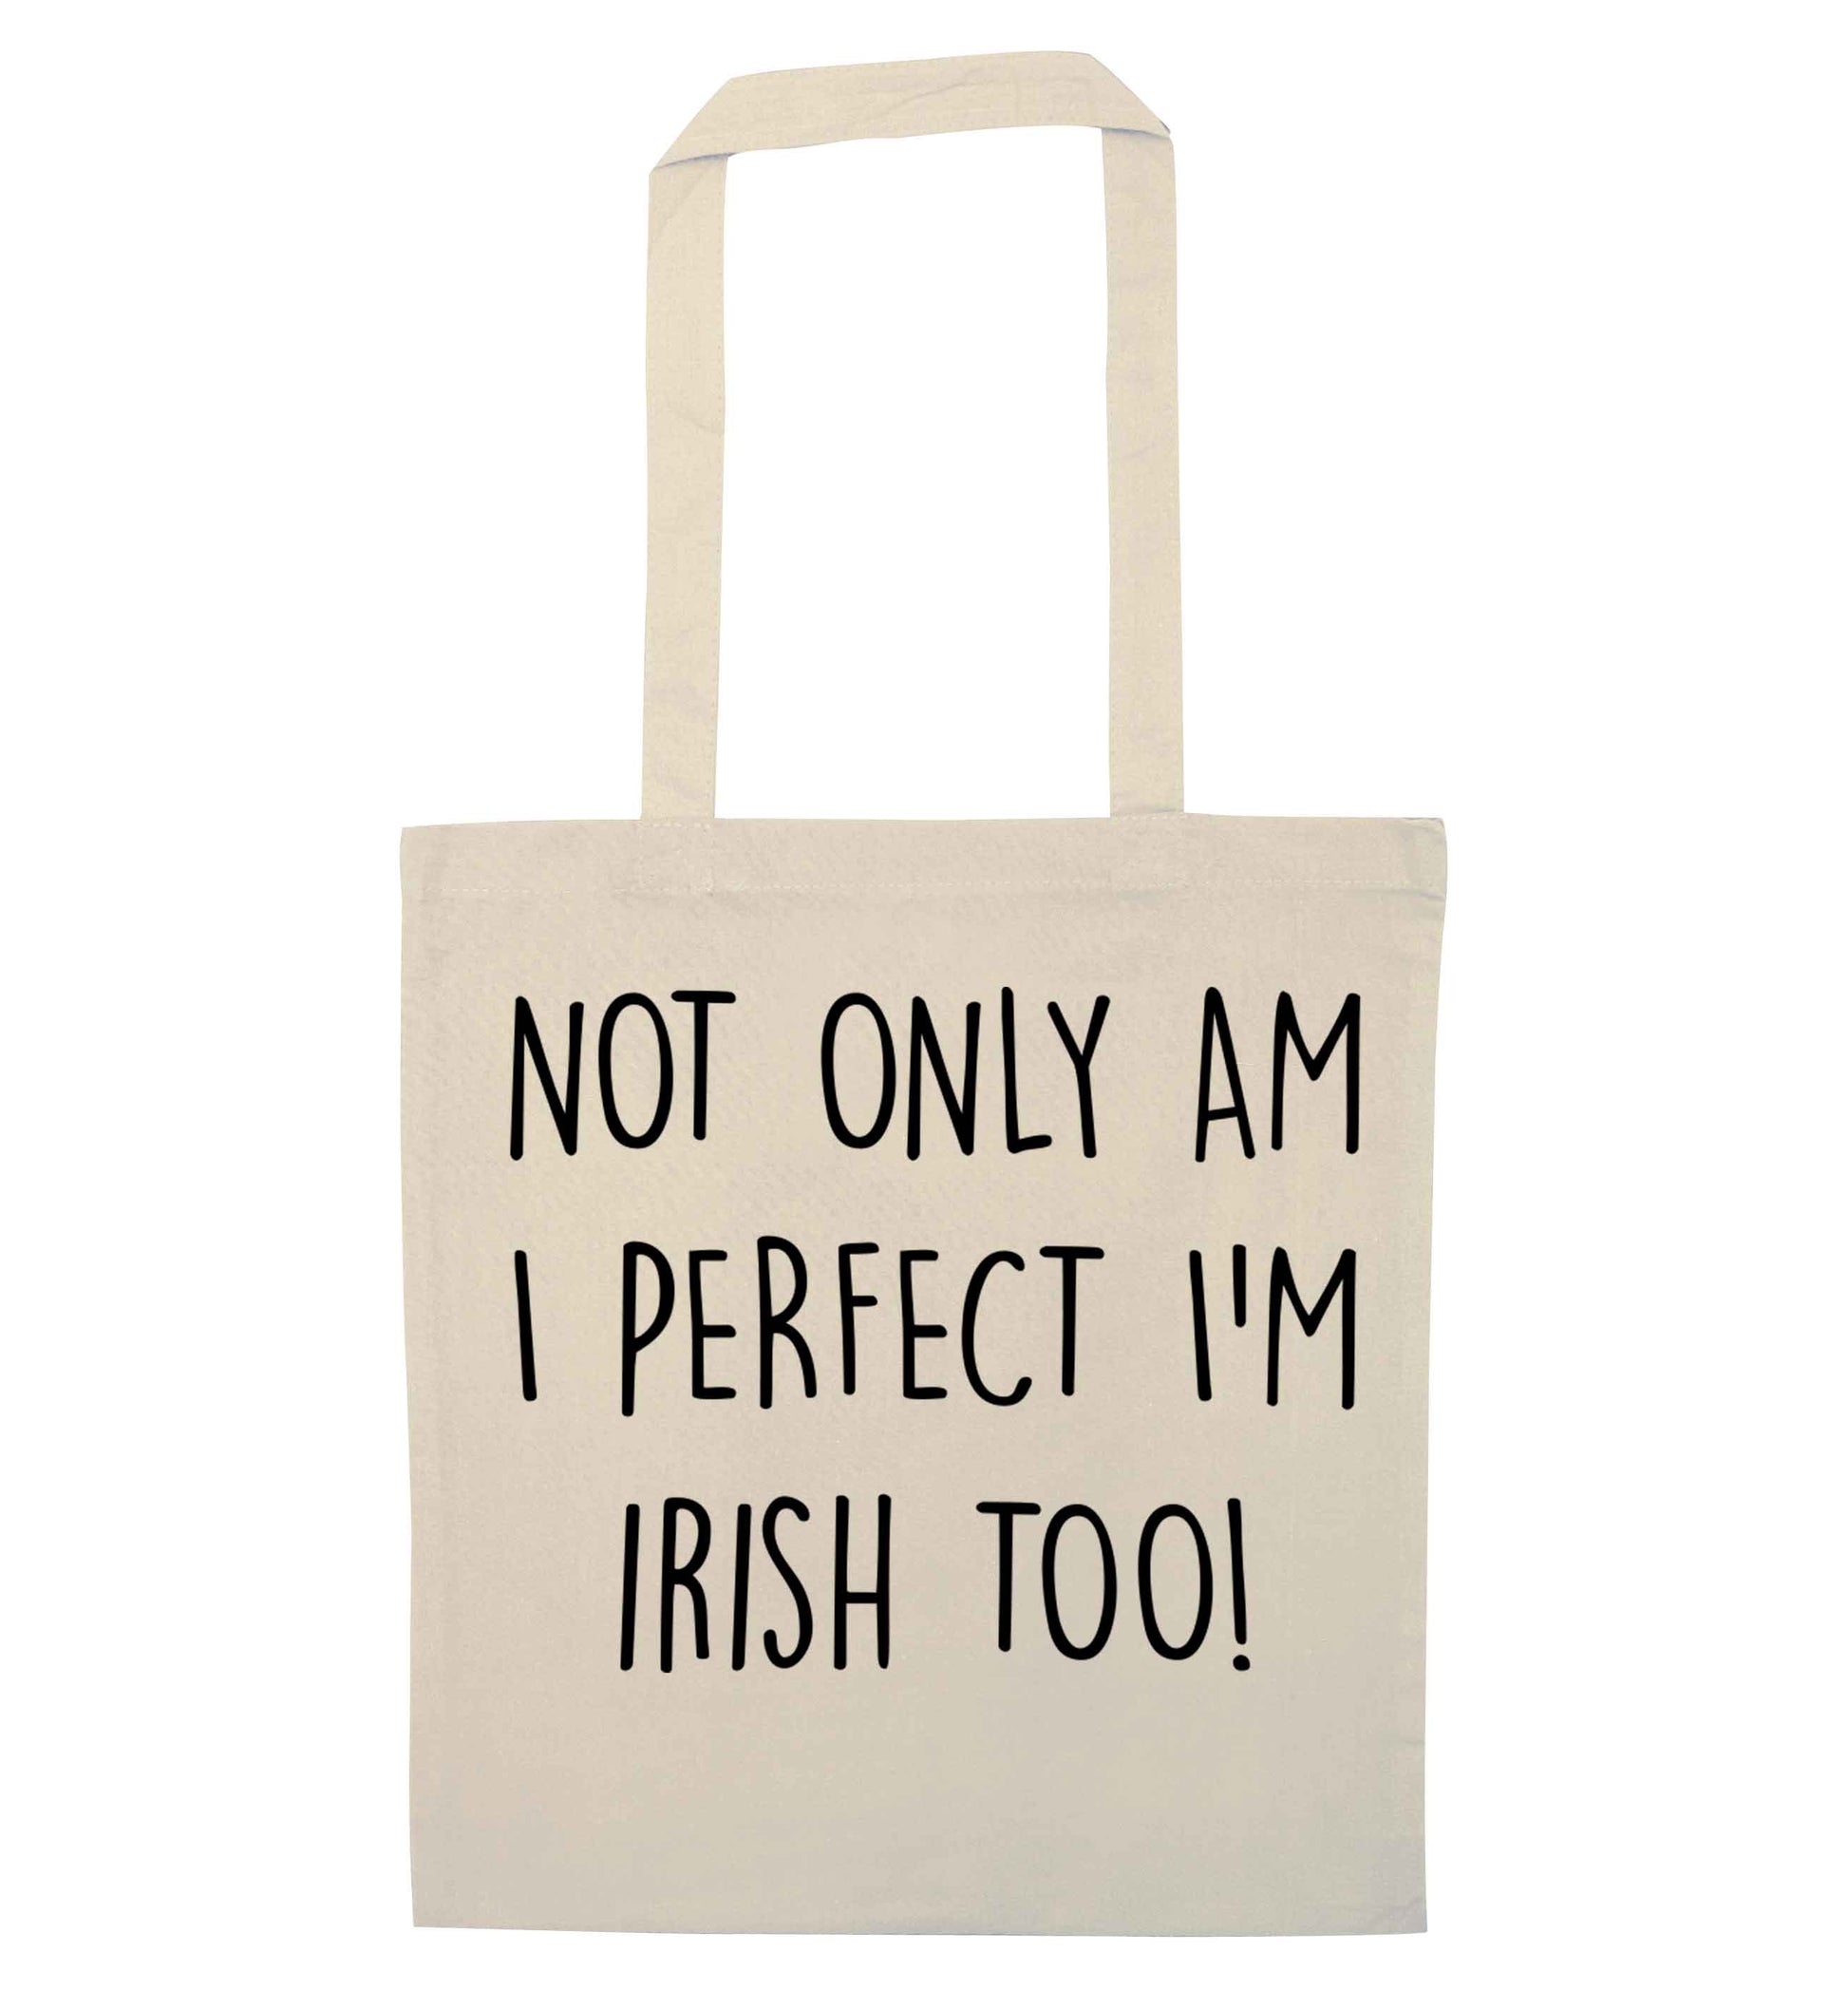 Not only am I perfect I'm Irish too! natural tote bag